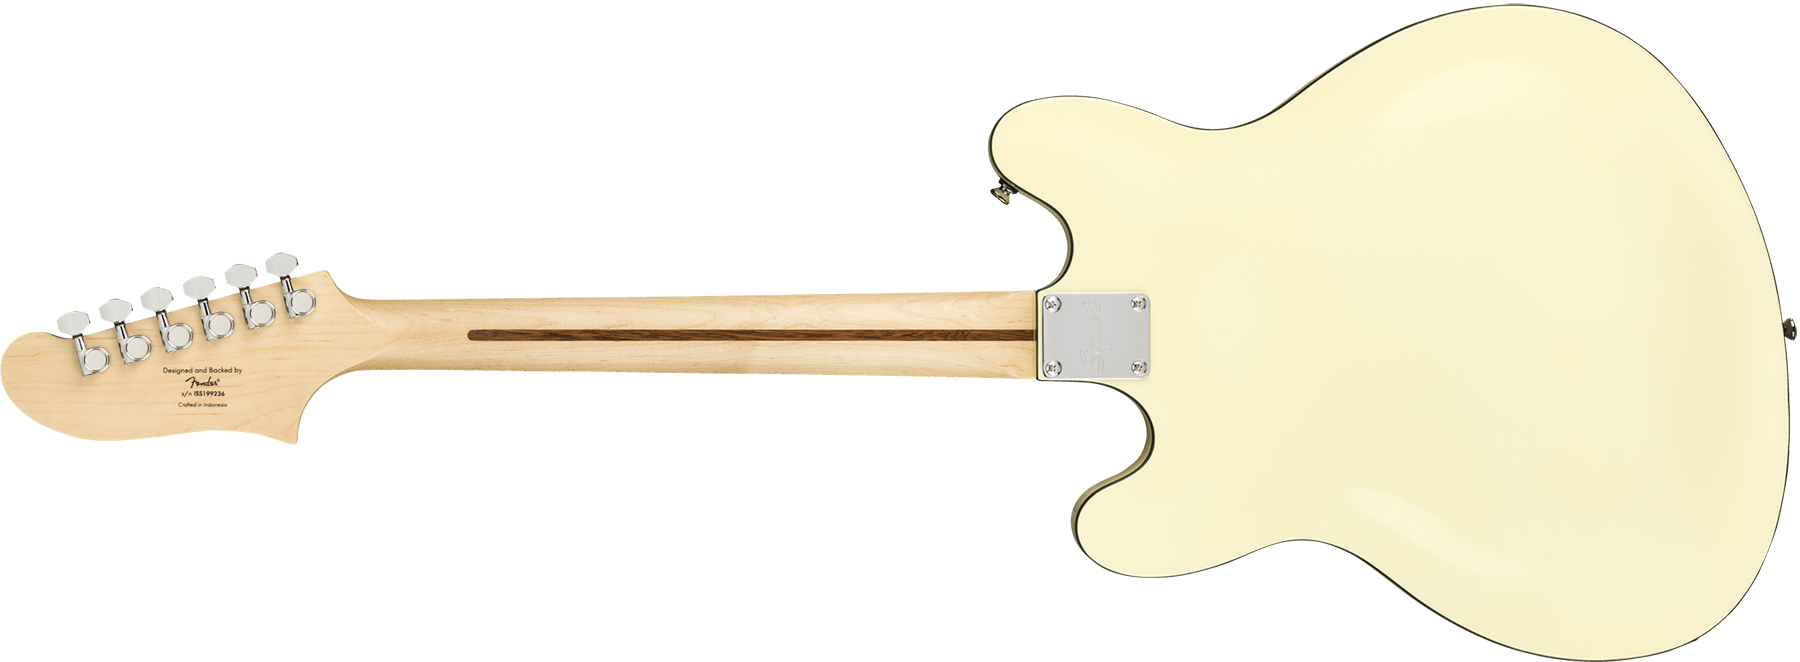 Squier Starcaster Affinity 2019 Hh Ht Mn - Olympic White - Guitarra electrica retro rock - Variation 1